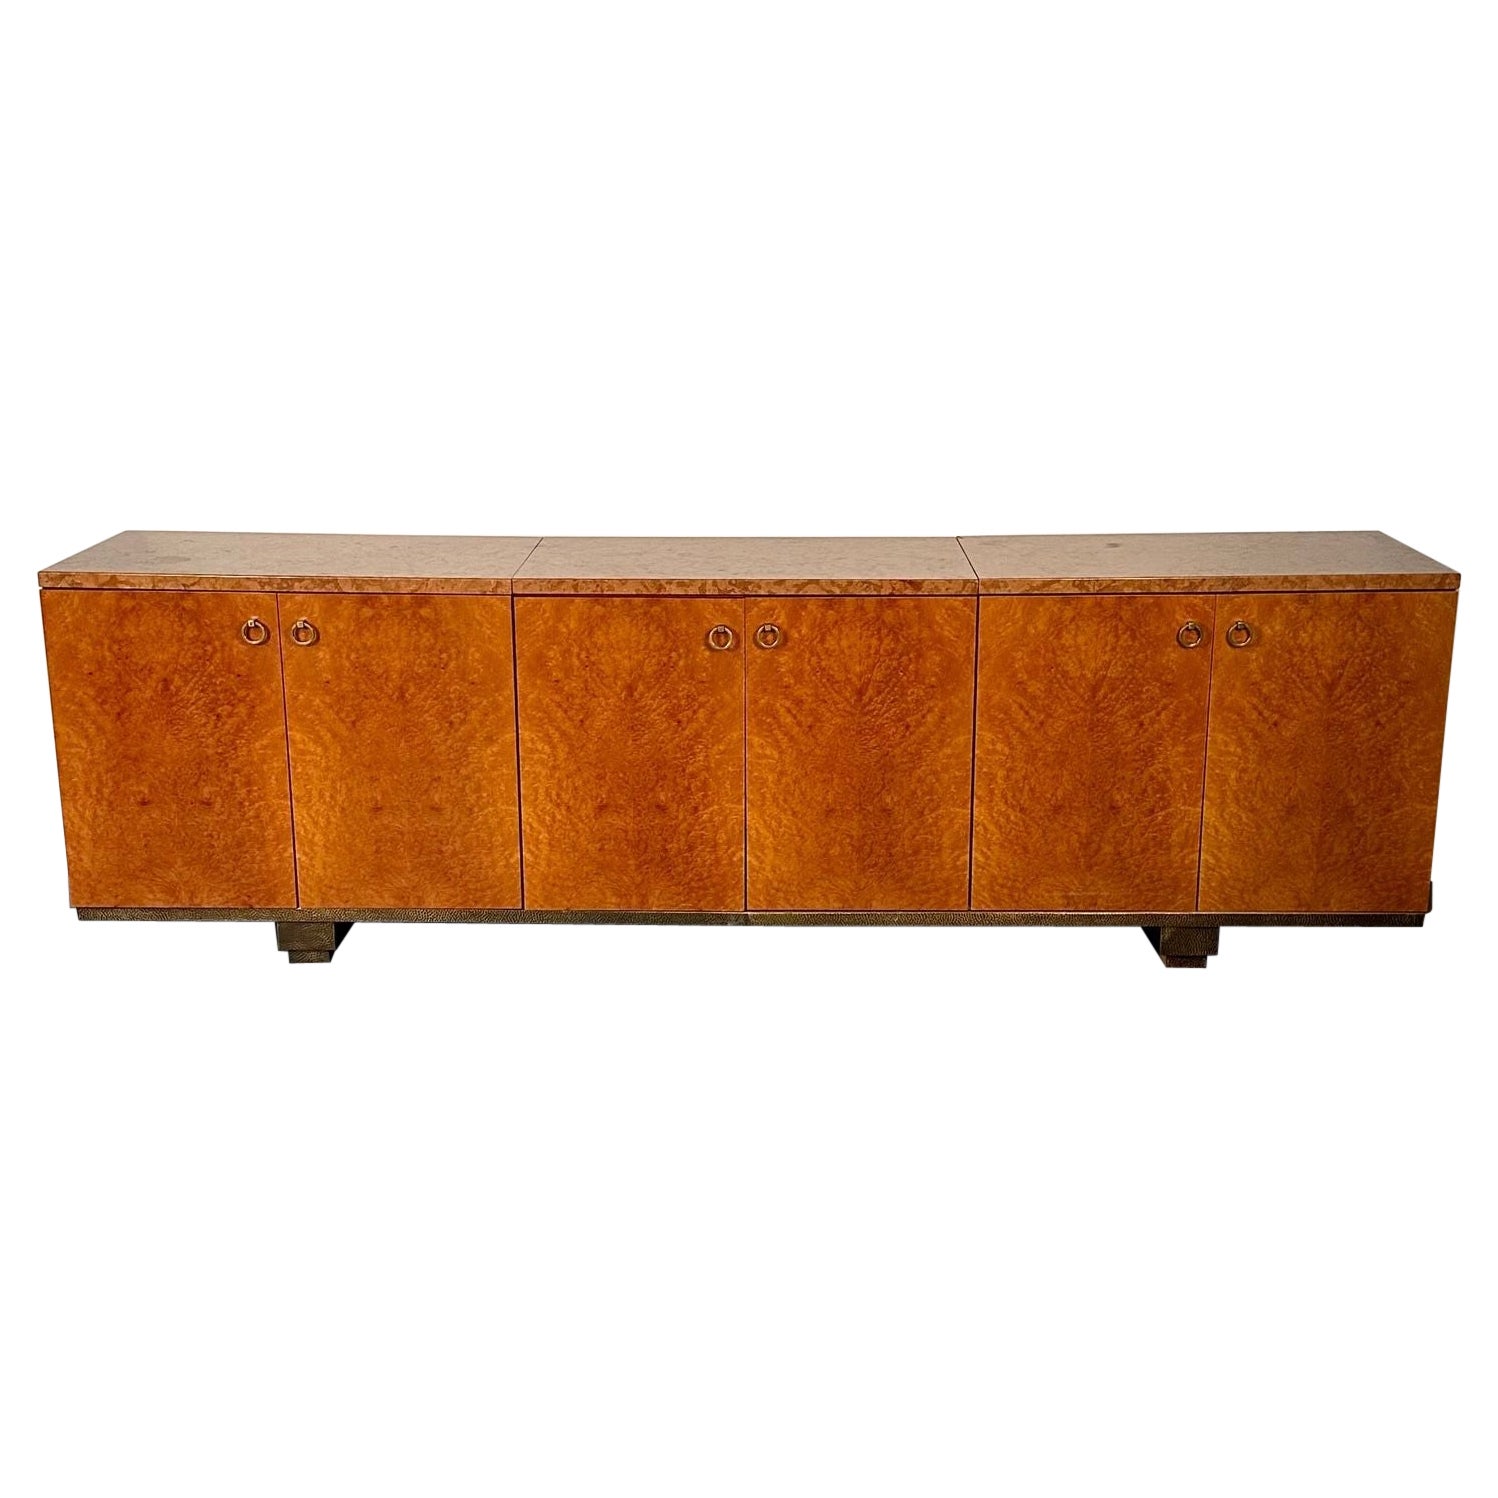 Peter Marino, Modern, Large Custom Sideboard, Maple, Marble, Brass, Canada For Sale